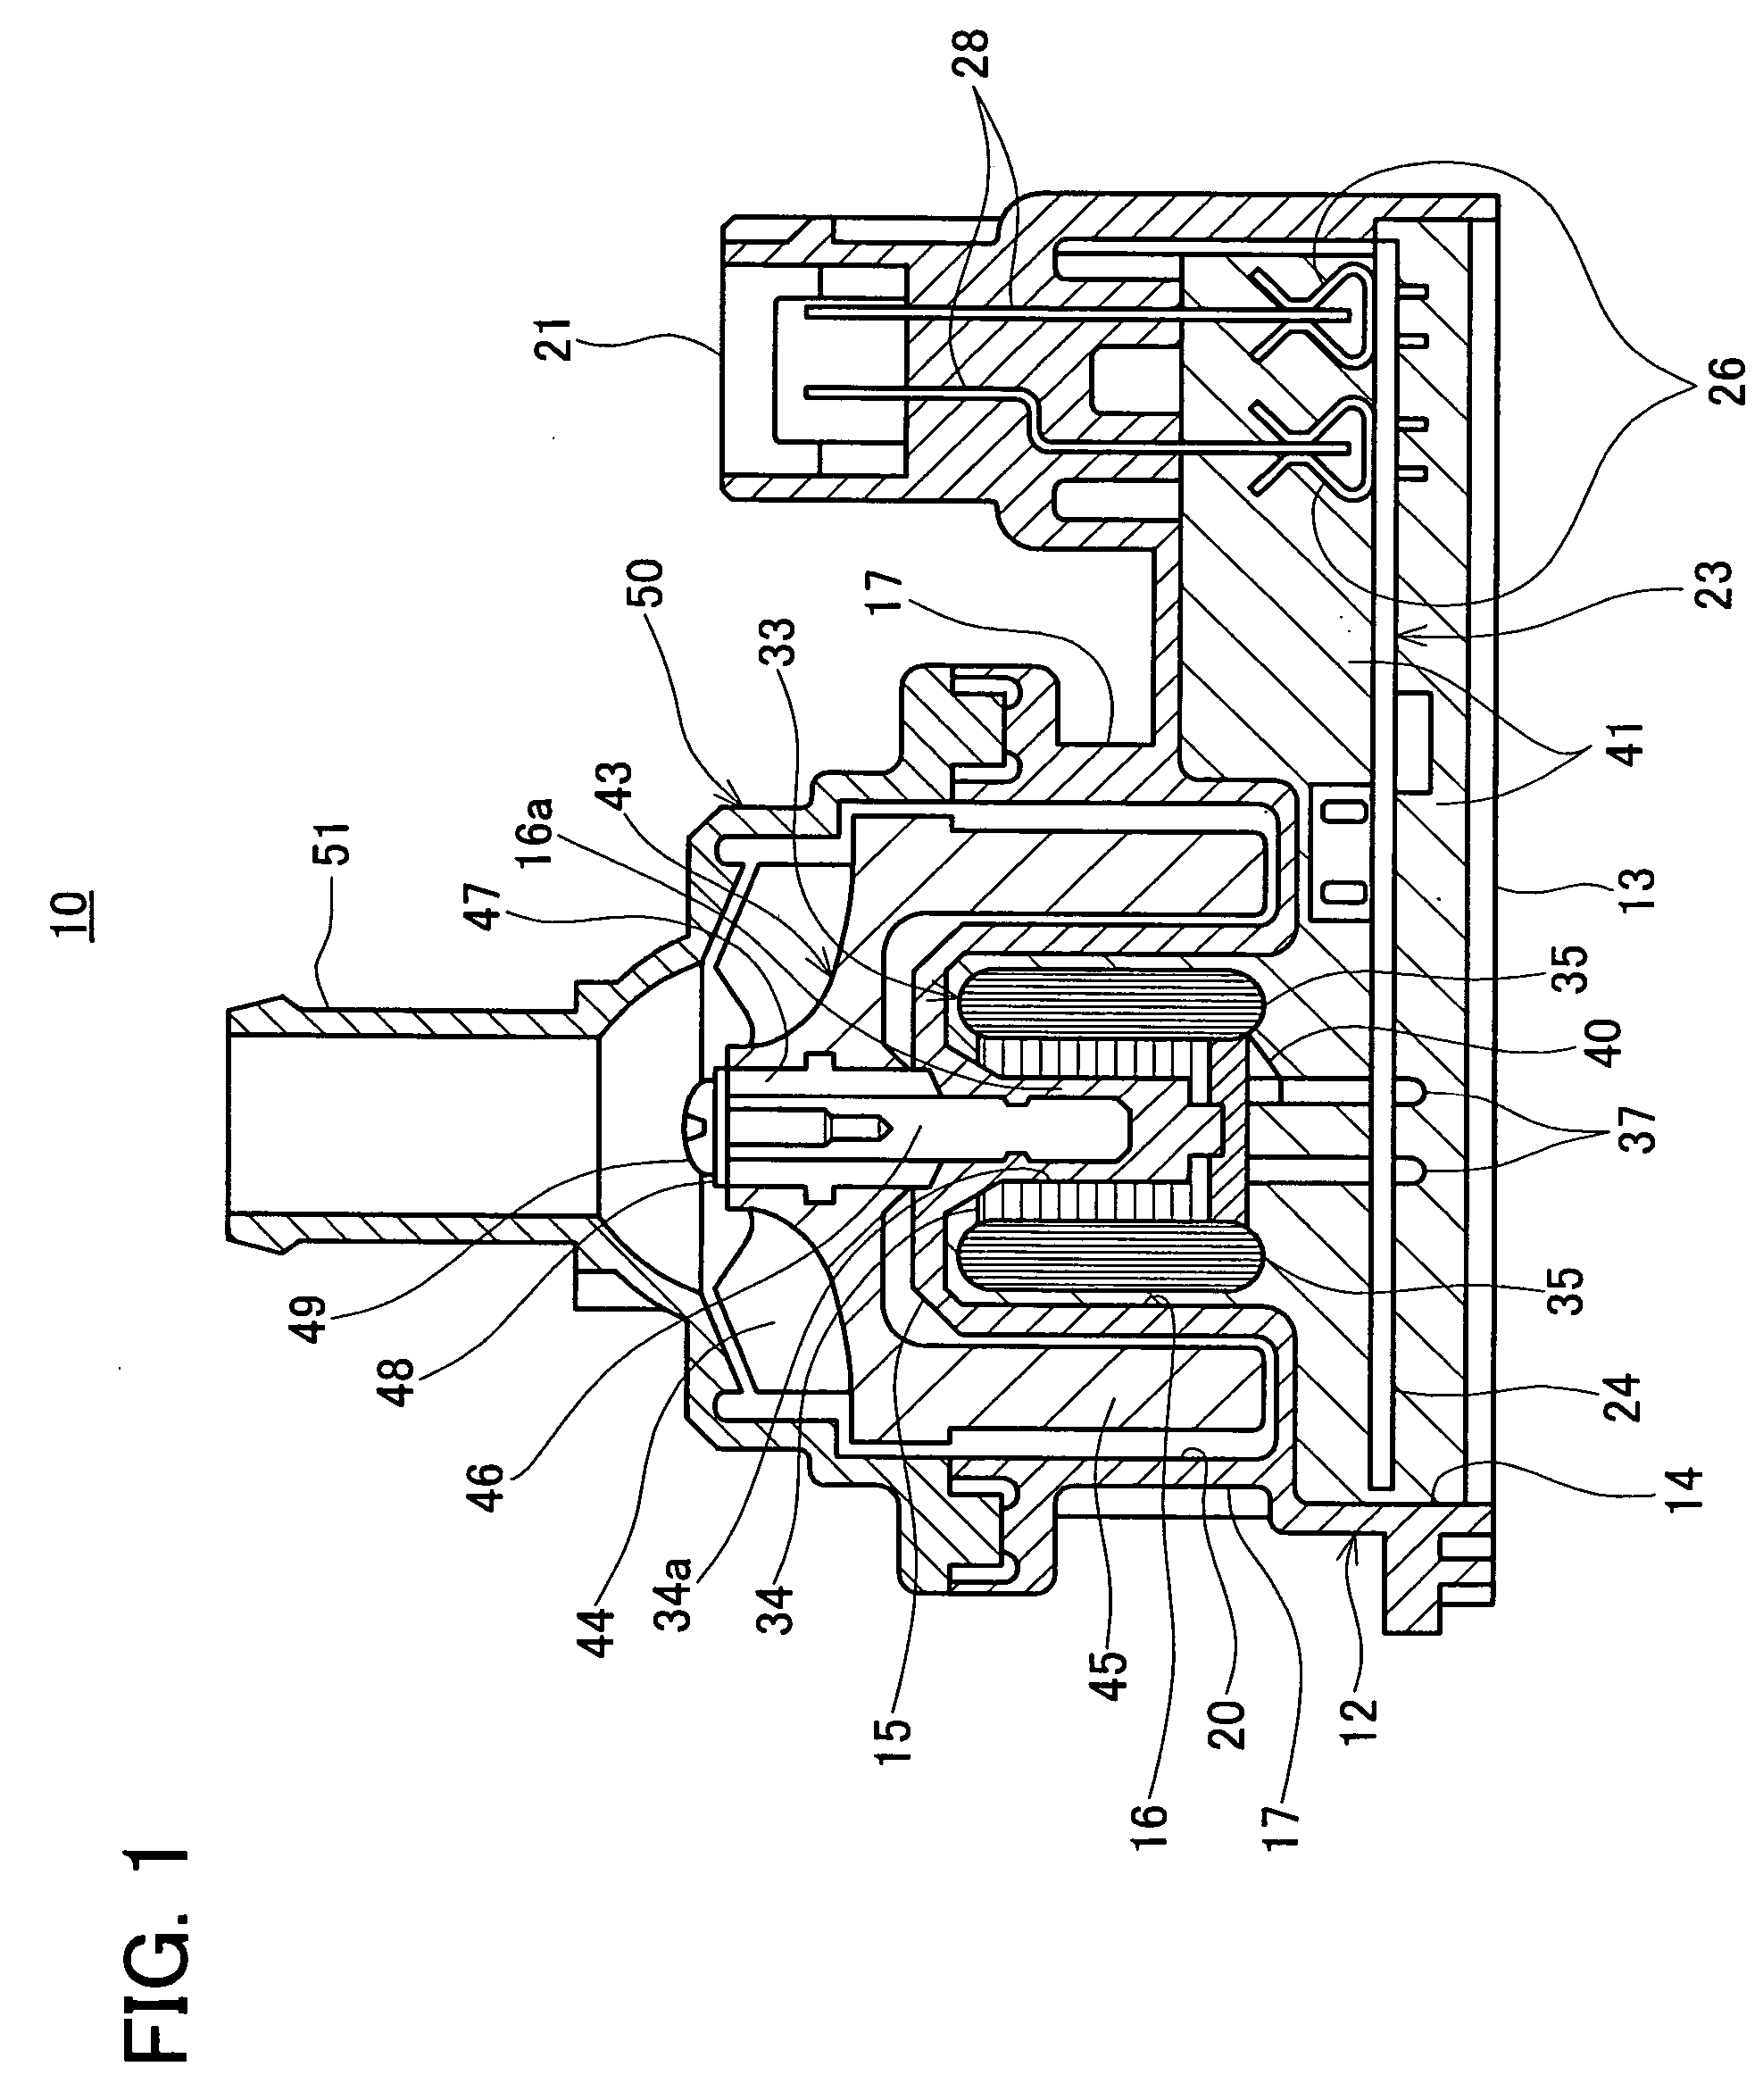 Electronic control unit and electric pump